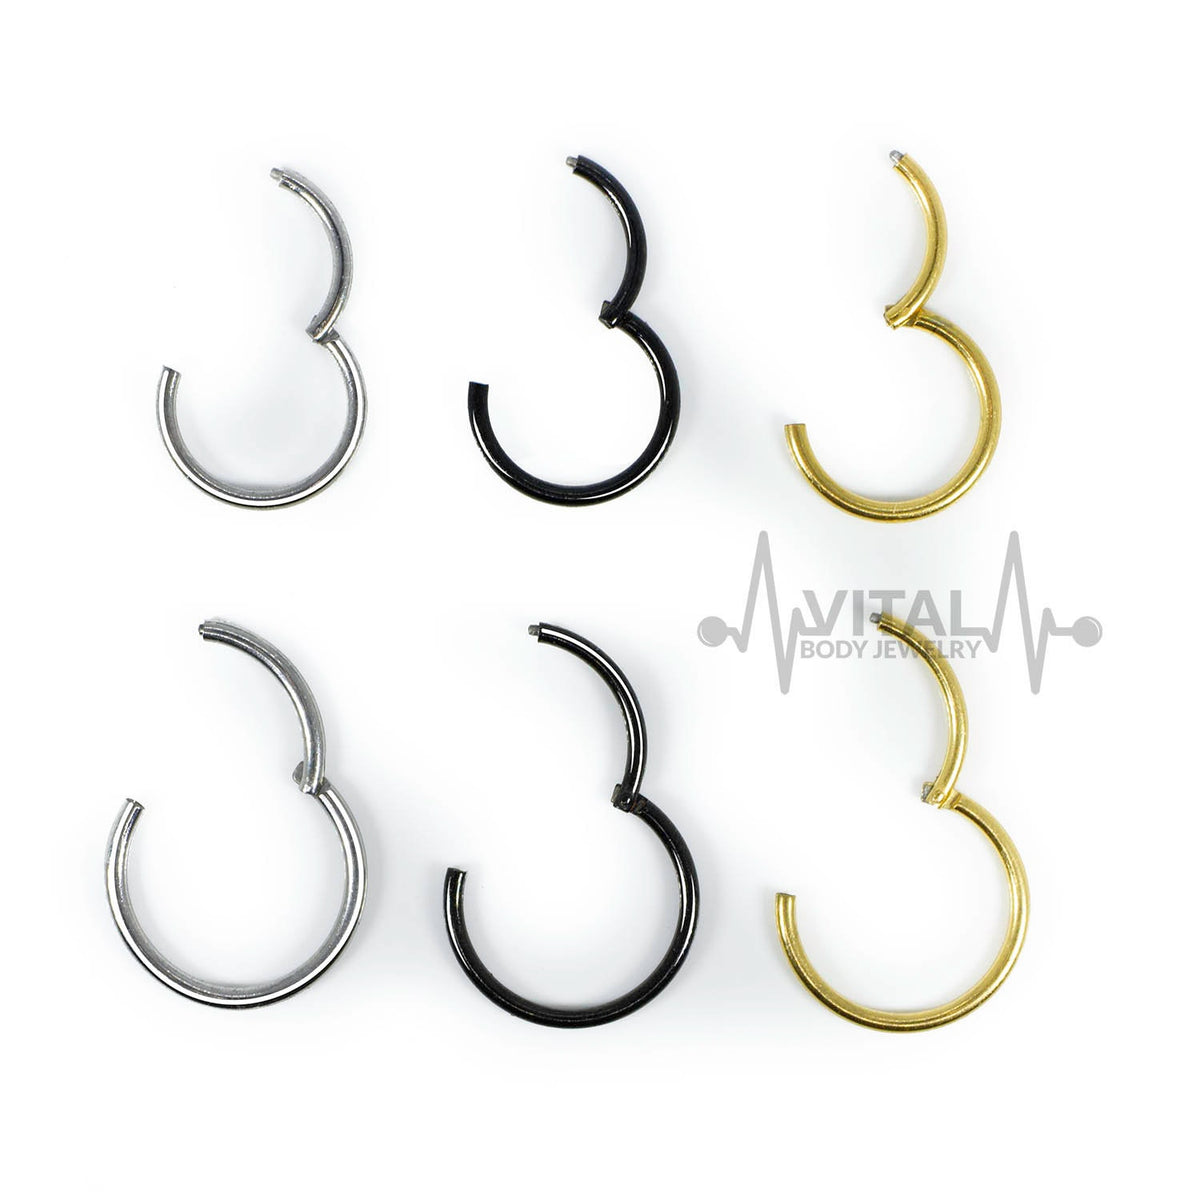 CZ PRONG GEM CENTER FEATHER 316L SURGICAL STEEL HINGED SEGMENT SEPTUM RING